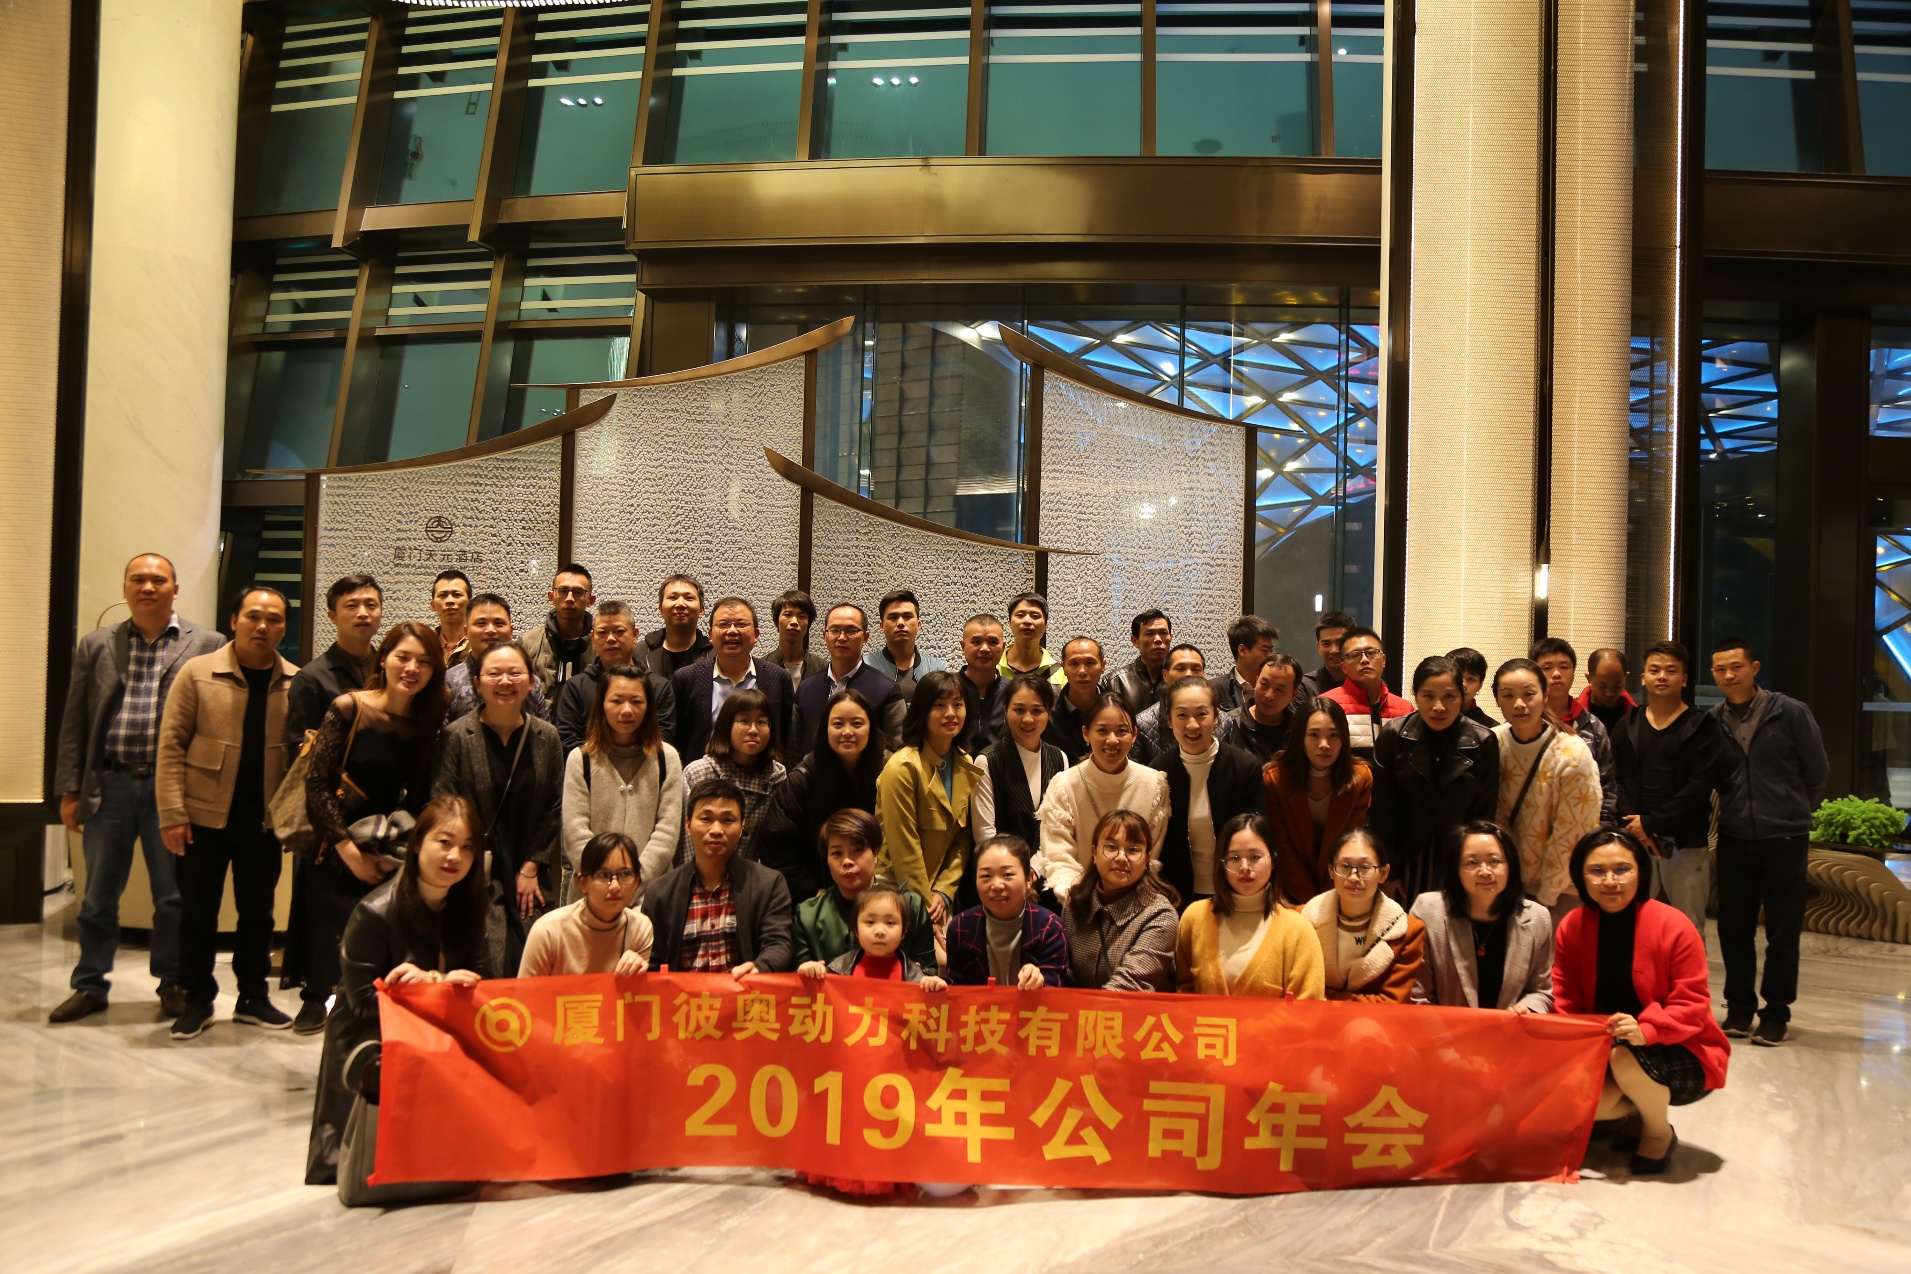 Cohesion and unity for a win-win future——Report from Biao Power 2019 end-year feast